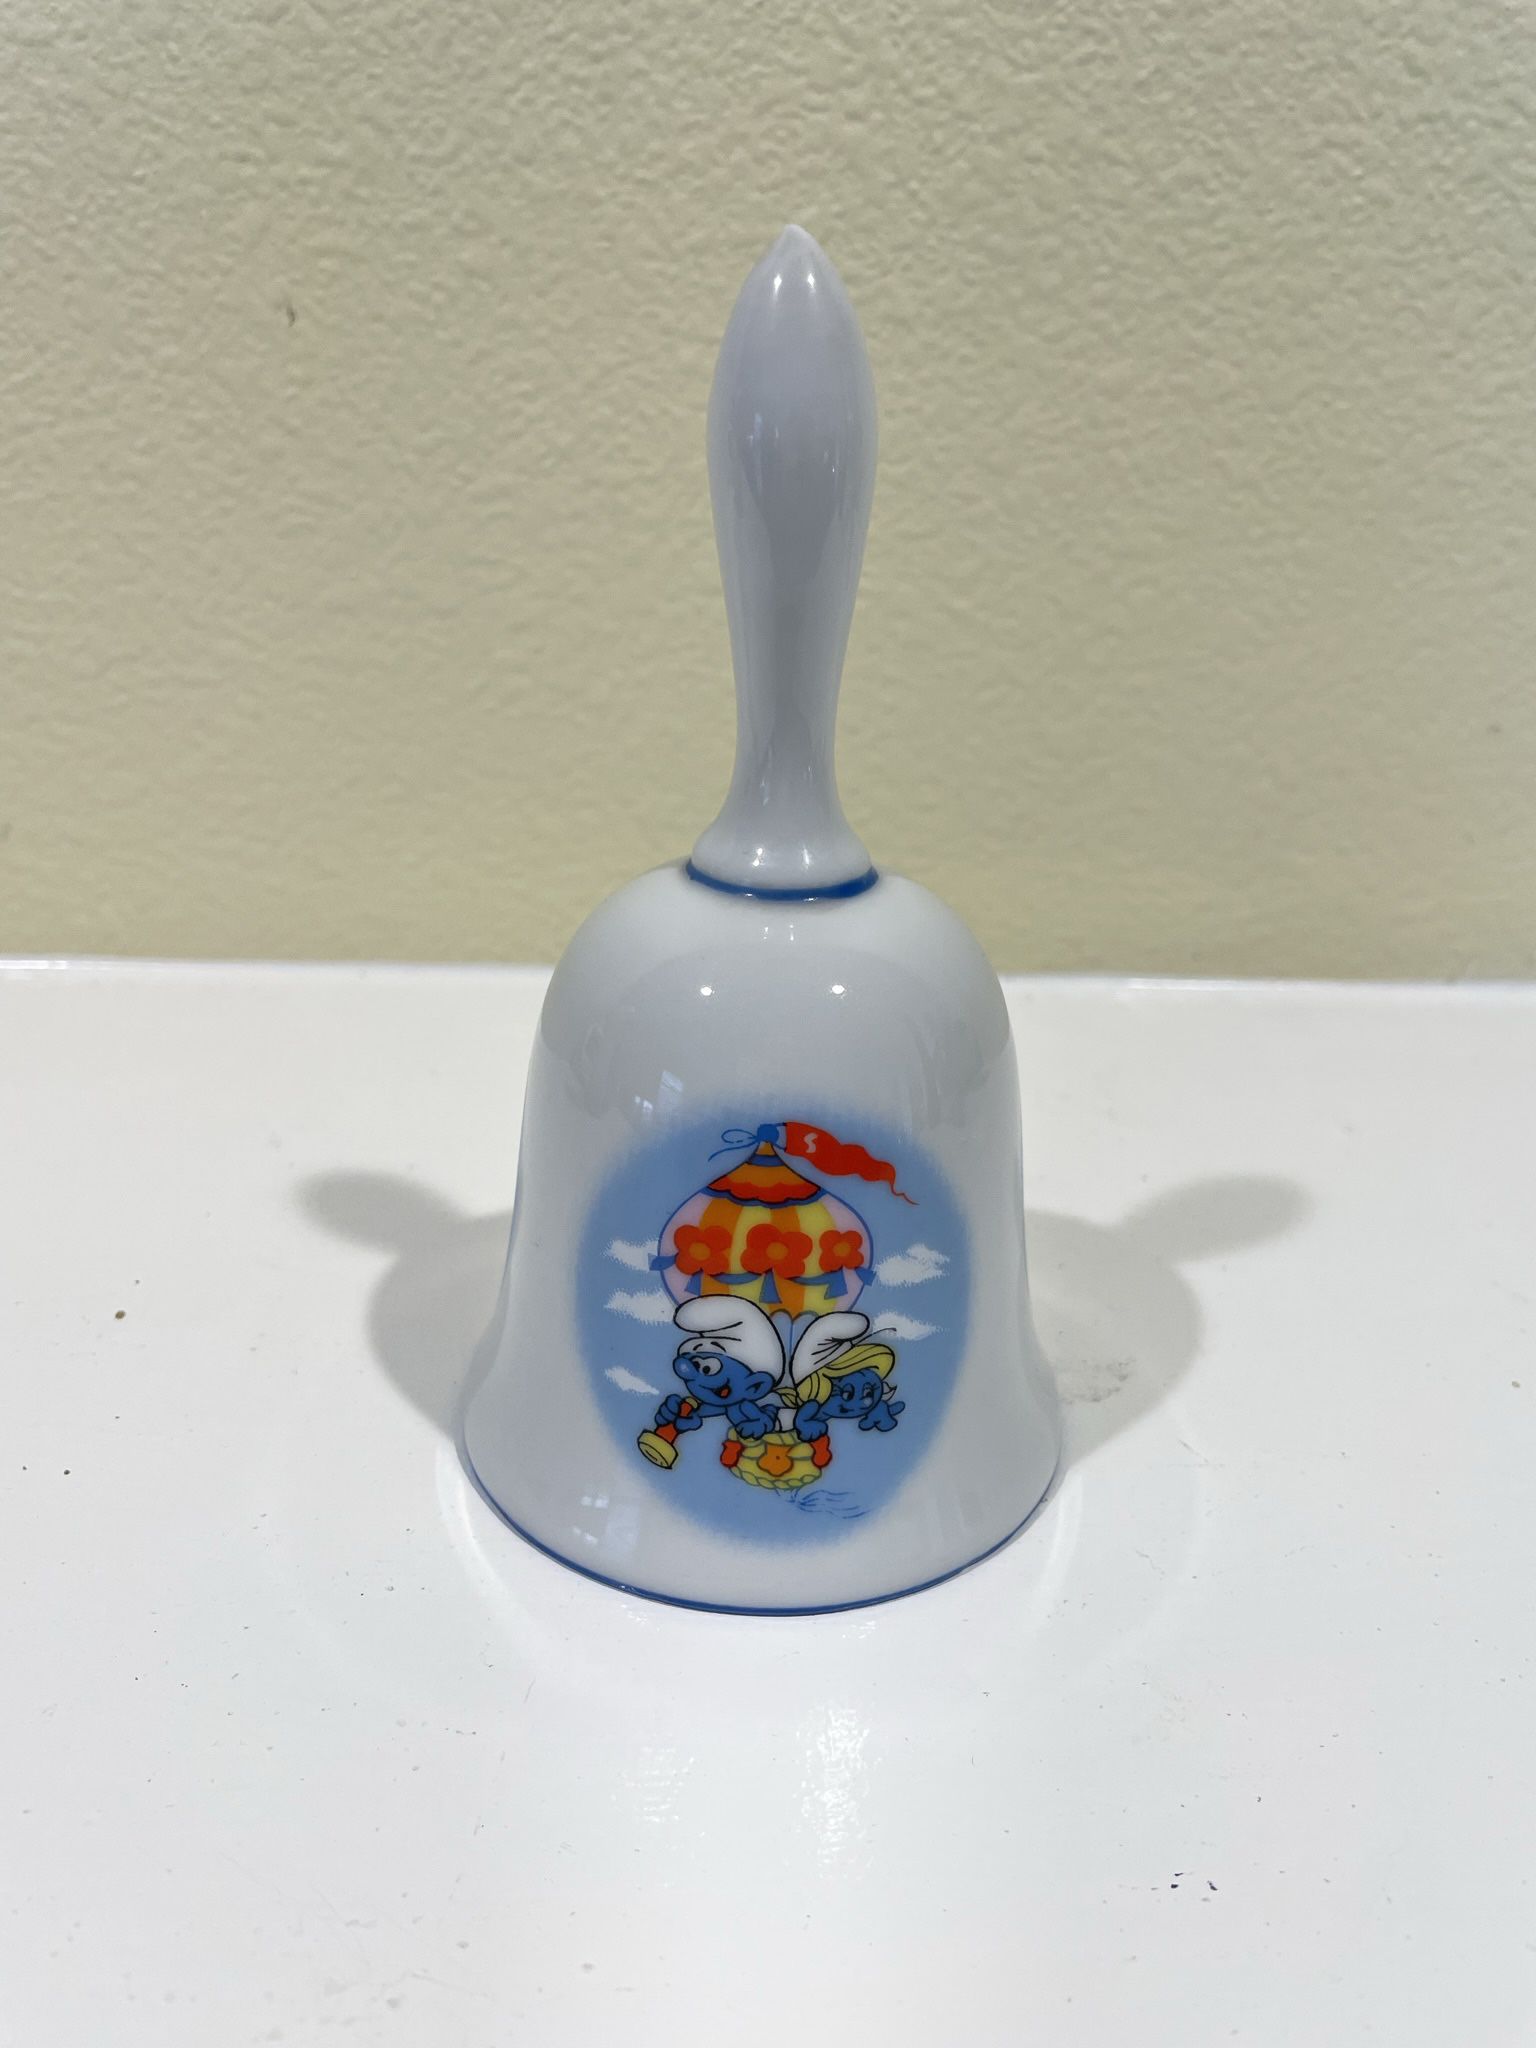 1982 Vintage Smurfs Porcelain Bell Hot Air Balloon - Wallace Berrie & Co .